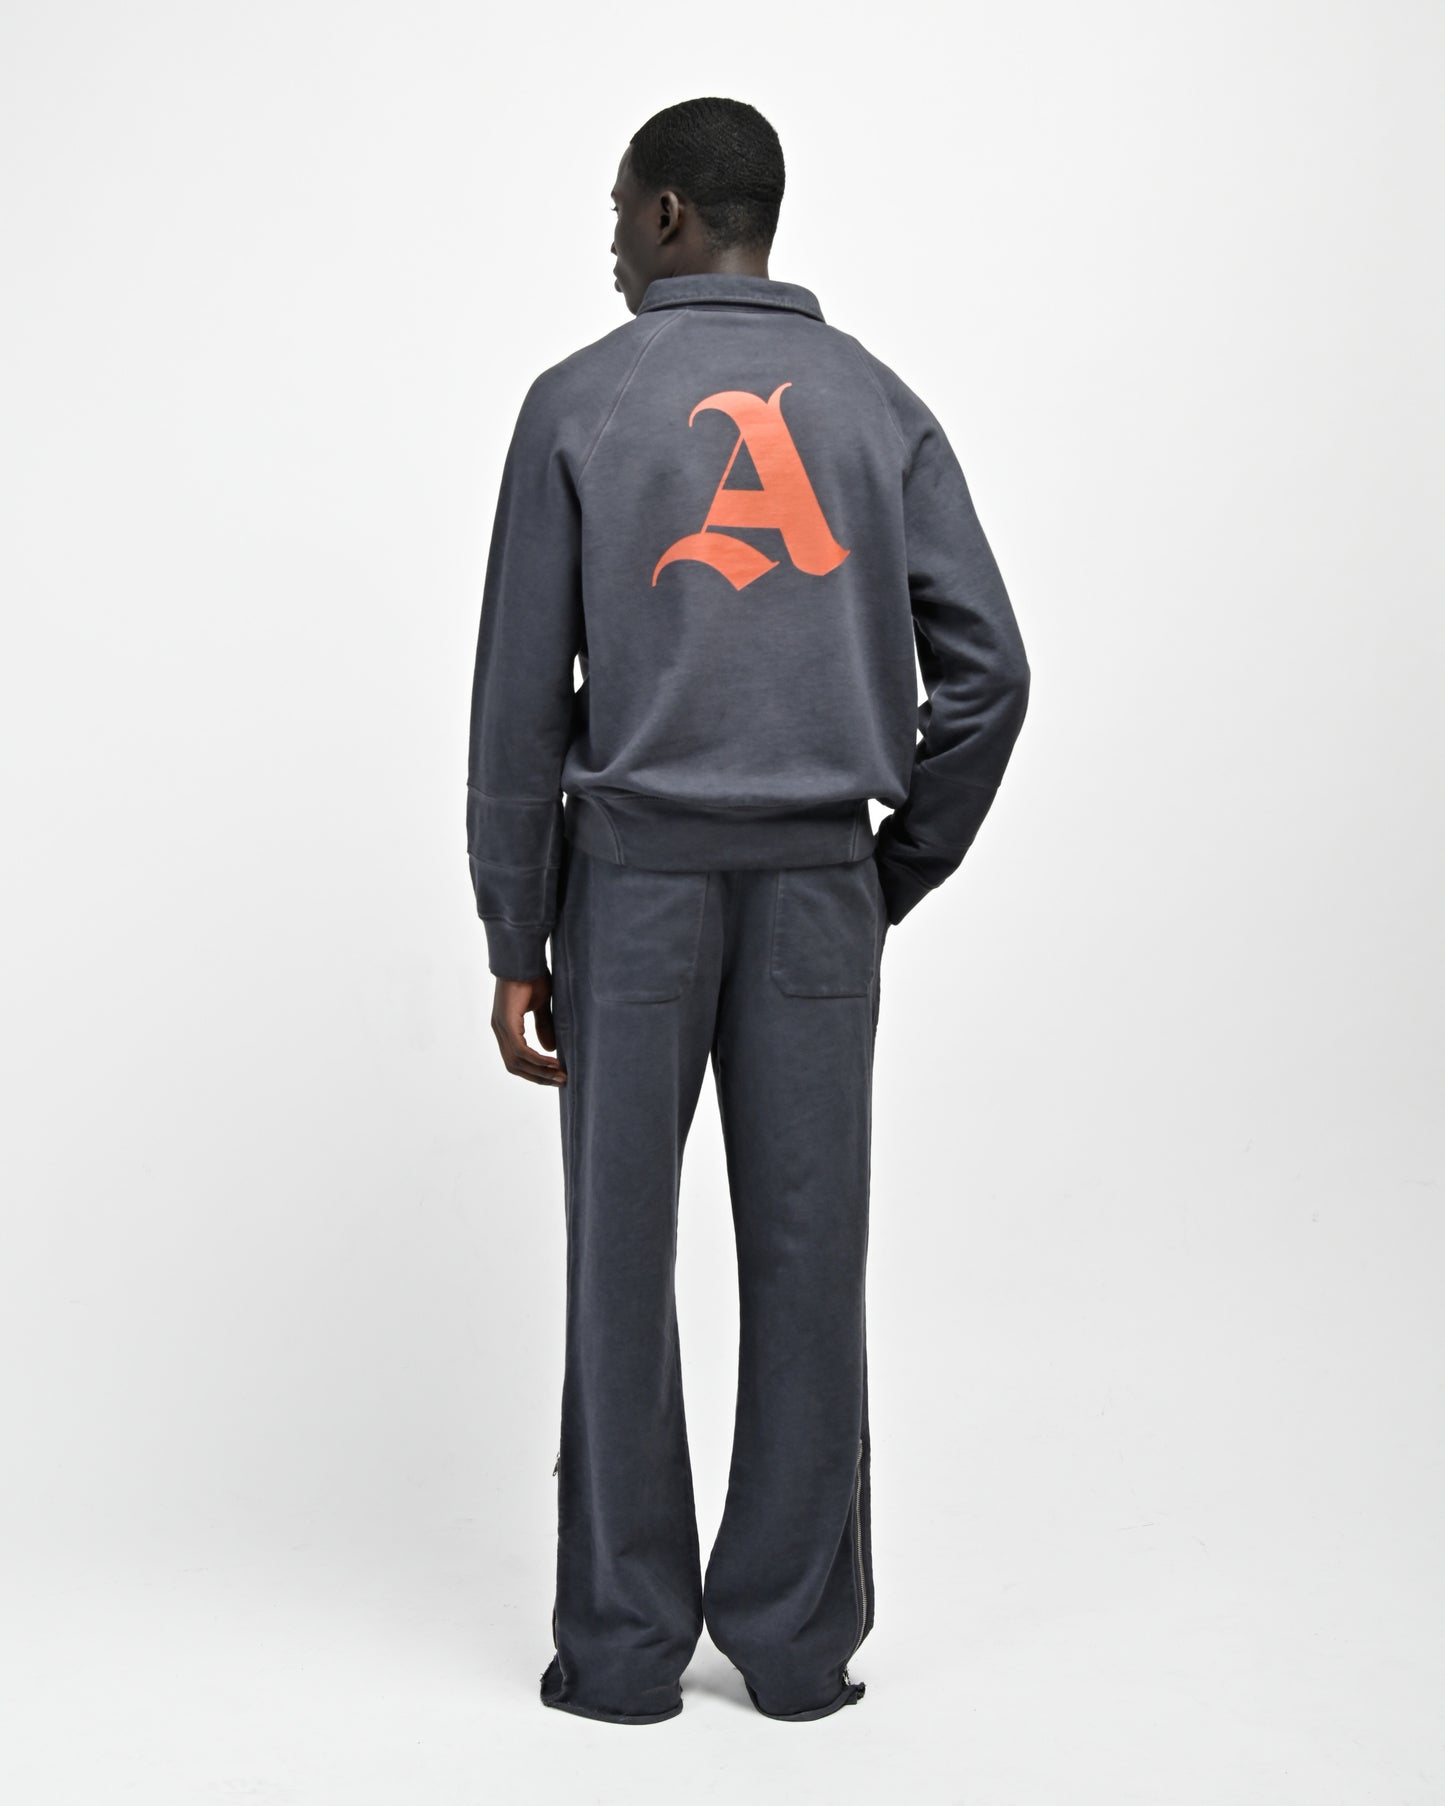 Back View of model wearing August Pullover Sweatshirt and Allora Track Pant by Aseye Studio